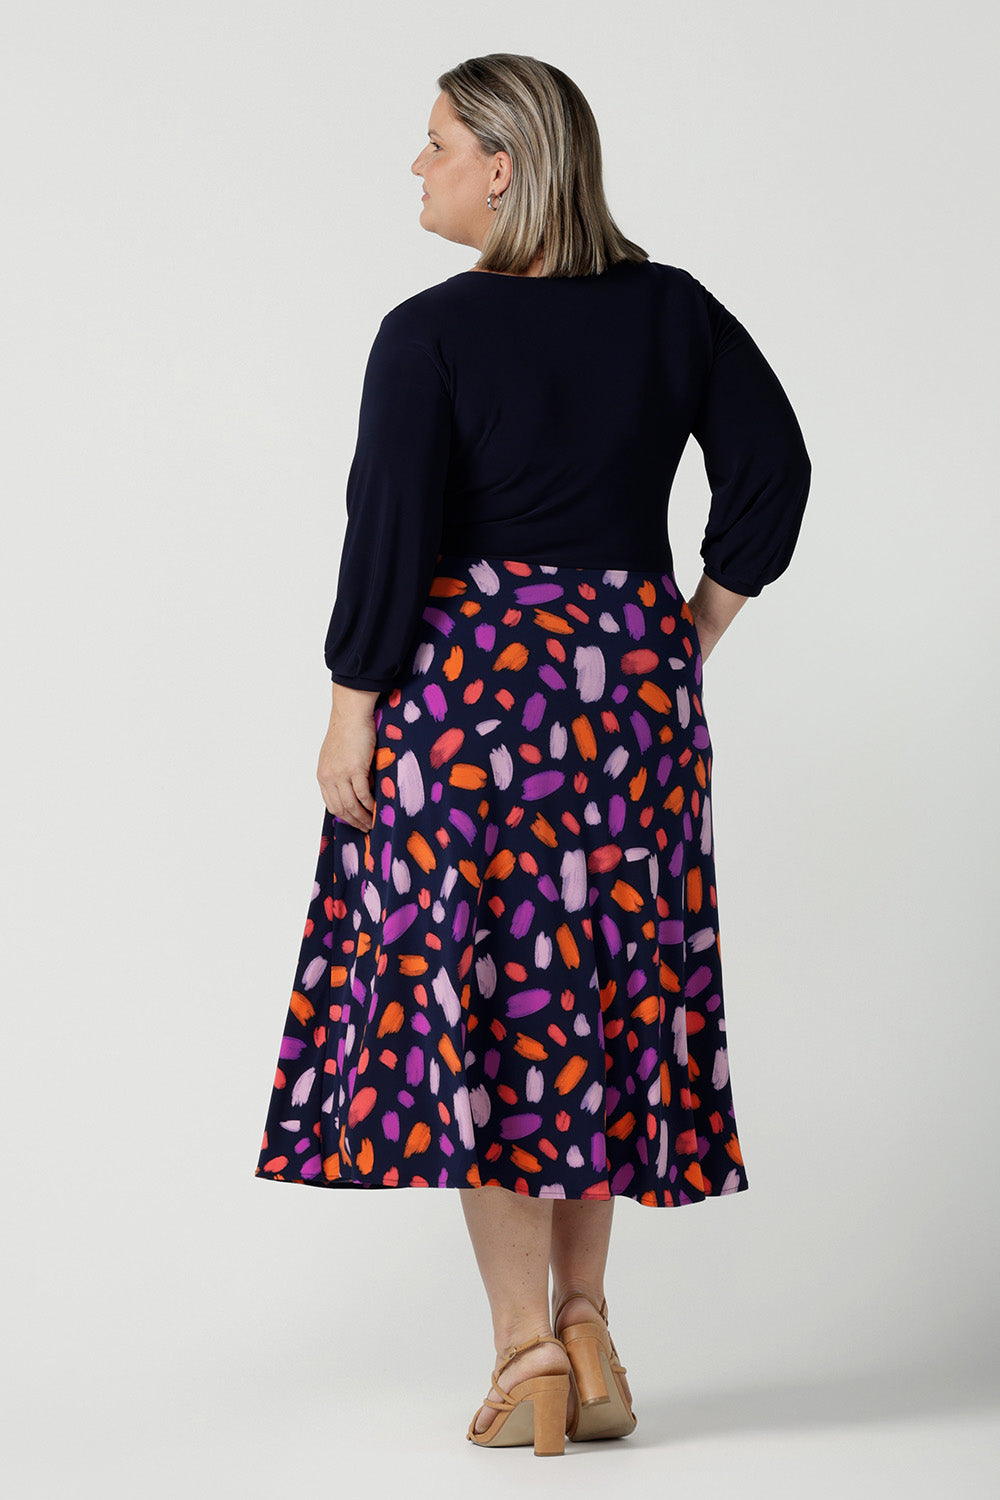 Back view of a size 18 curvy woman wears the Nerida dress. Functioning fit and flare wrap dress with a navy bodice and printed skirt. 3/4 Sleeves and functioning pockets. Made in Australia for women. Size 8 - 24. Styled back with a brown sling back heel.